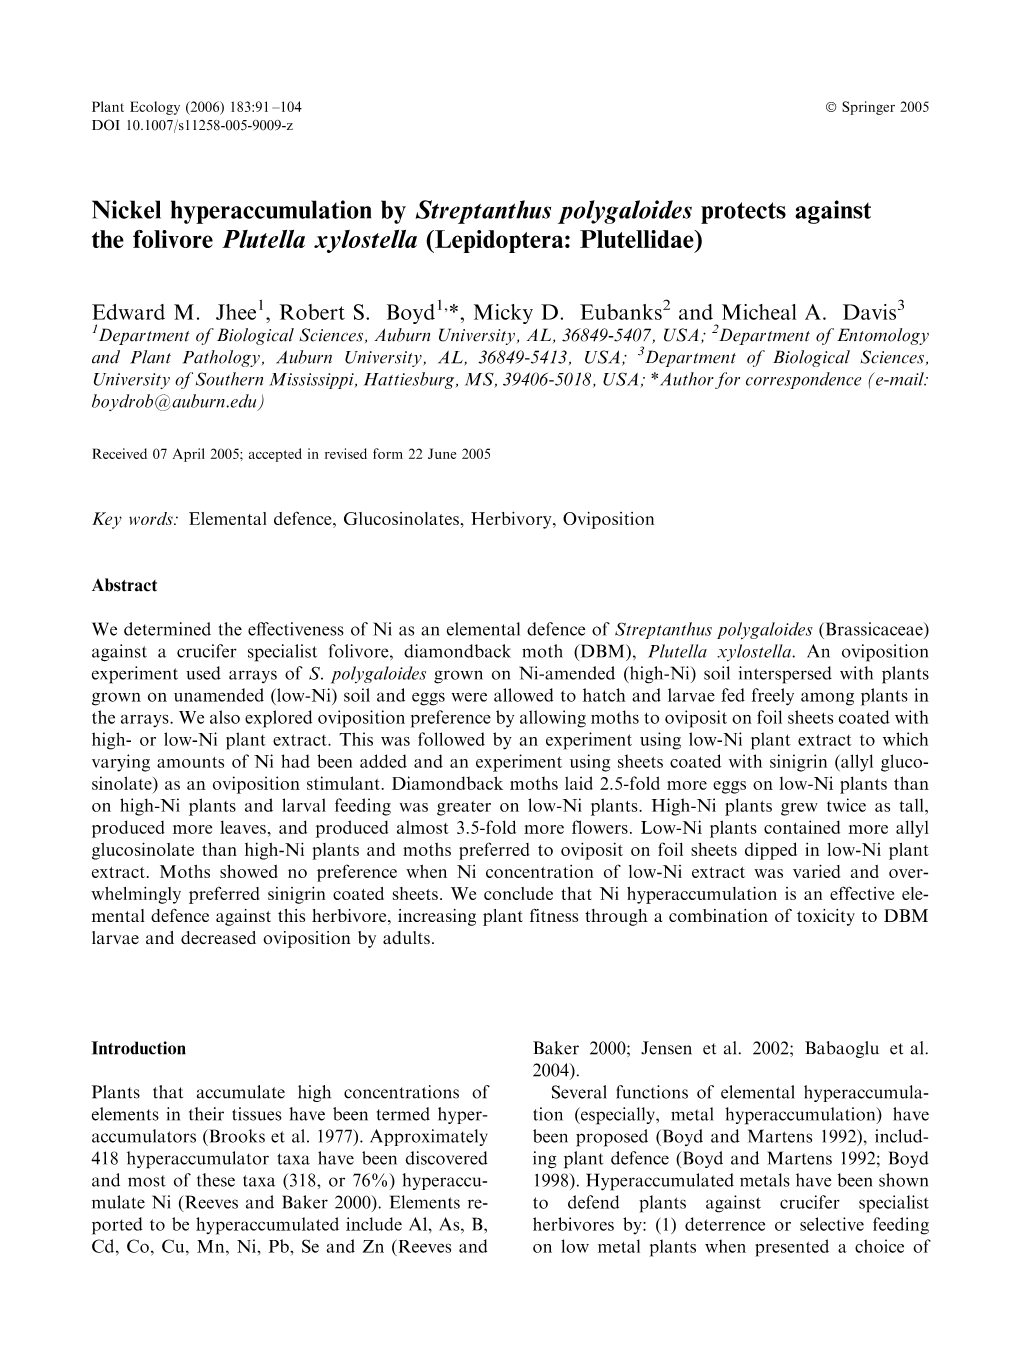 Nickel Hyperaccumulation by Streptanthus Polygaloides Protects Against the Folivore Plutella Xylostella (Lepidoptera: Plutellidae)